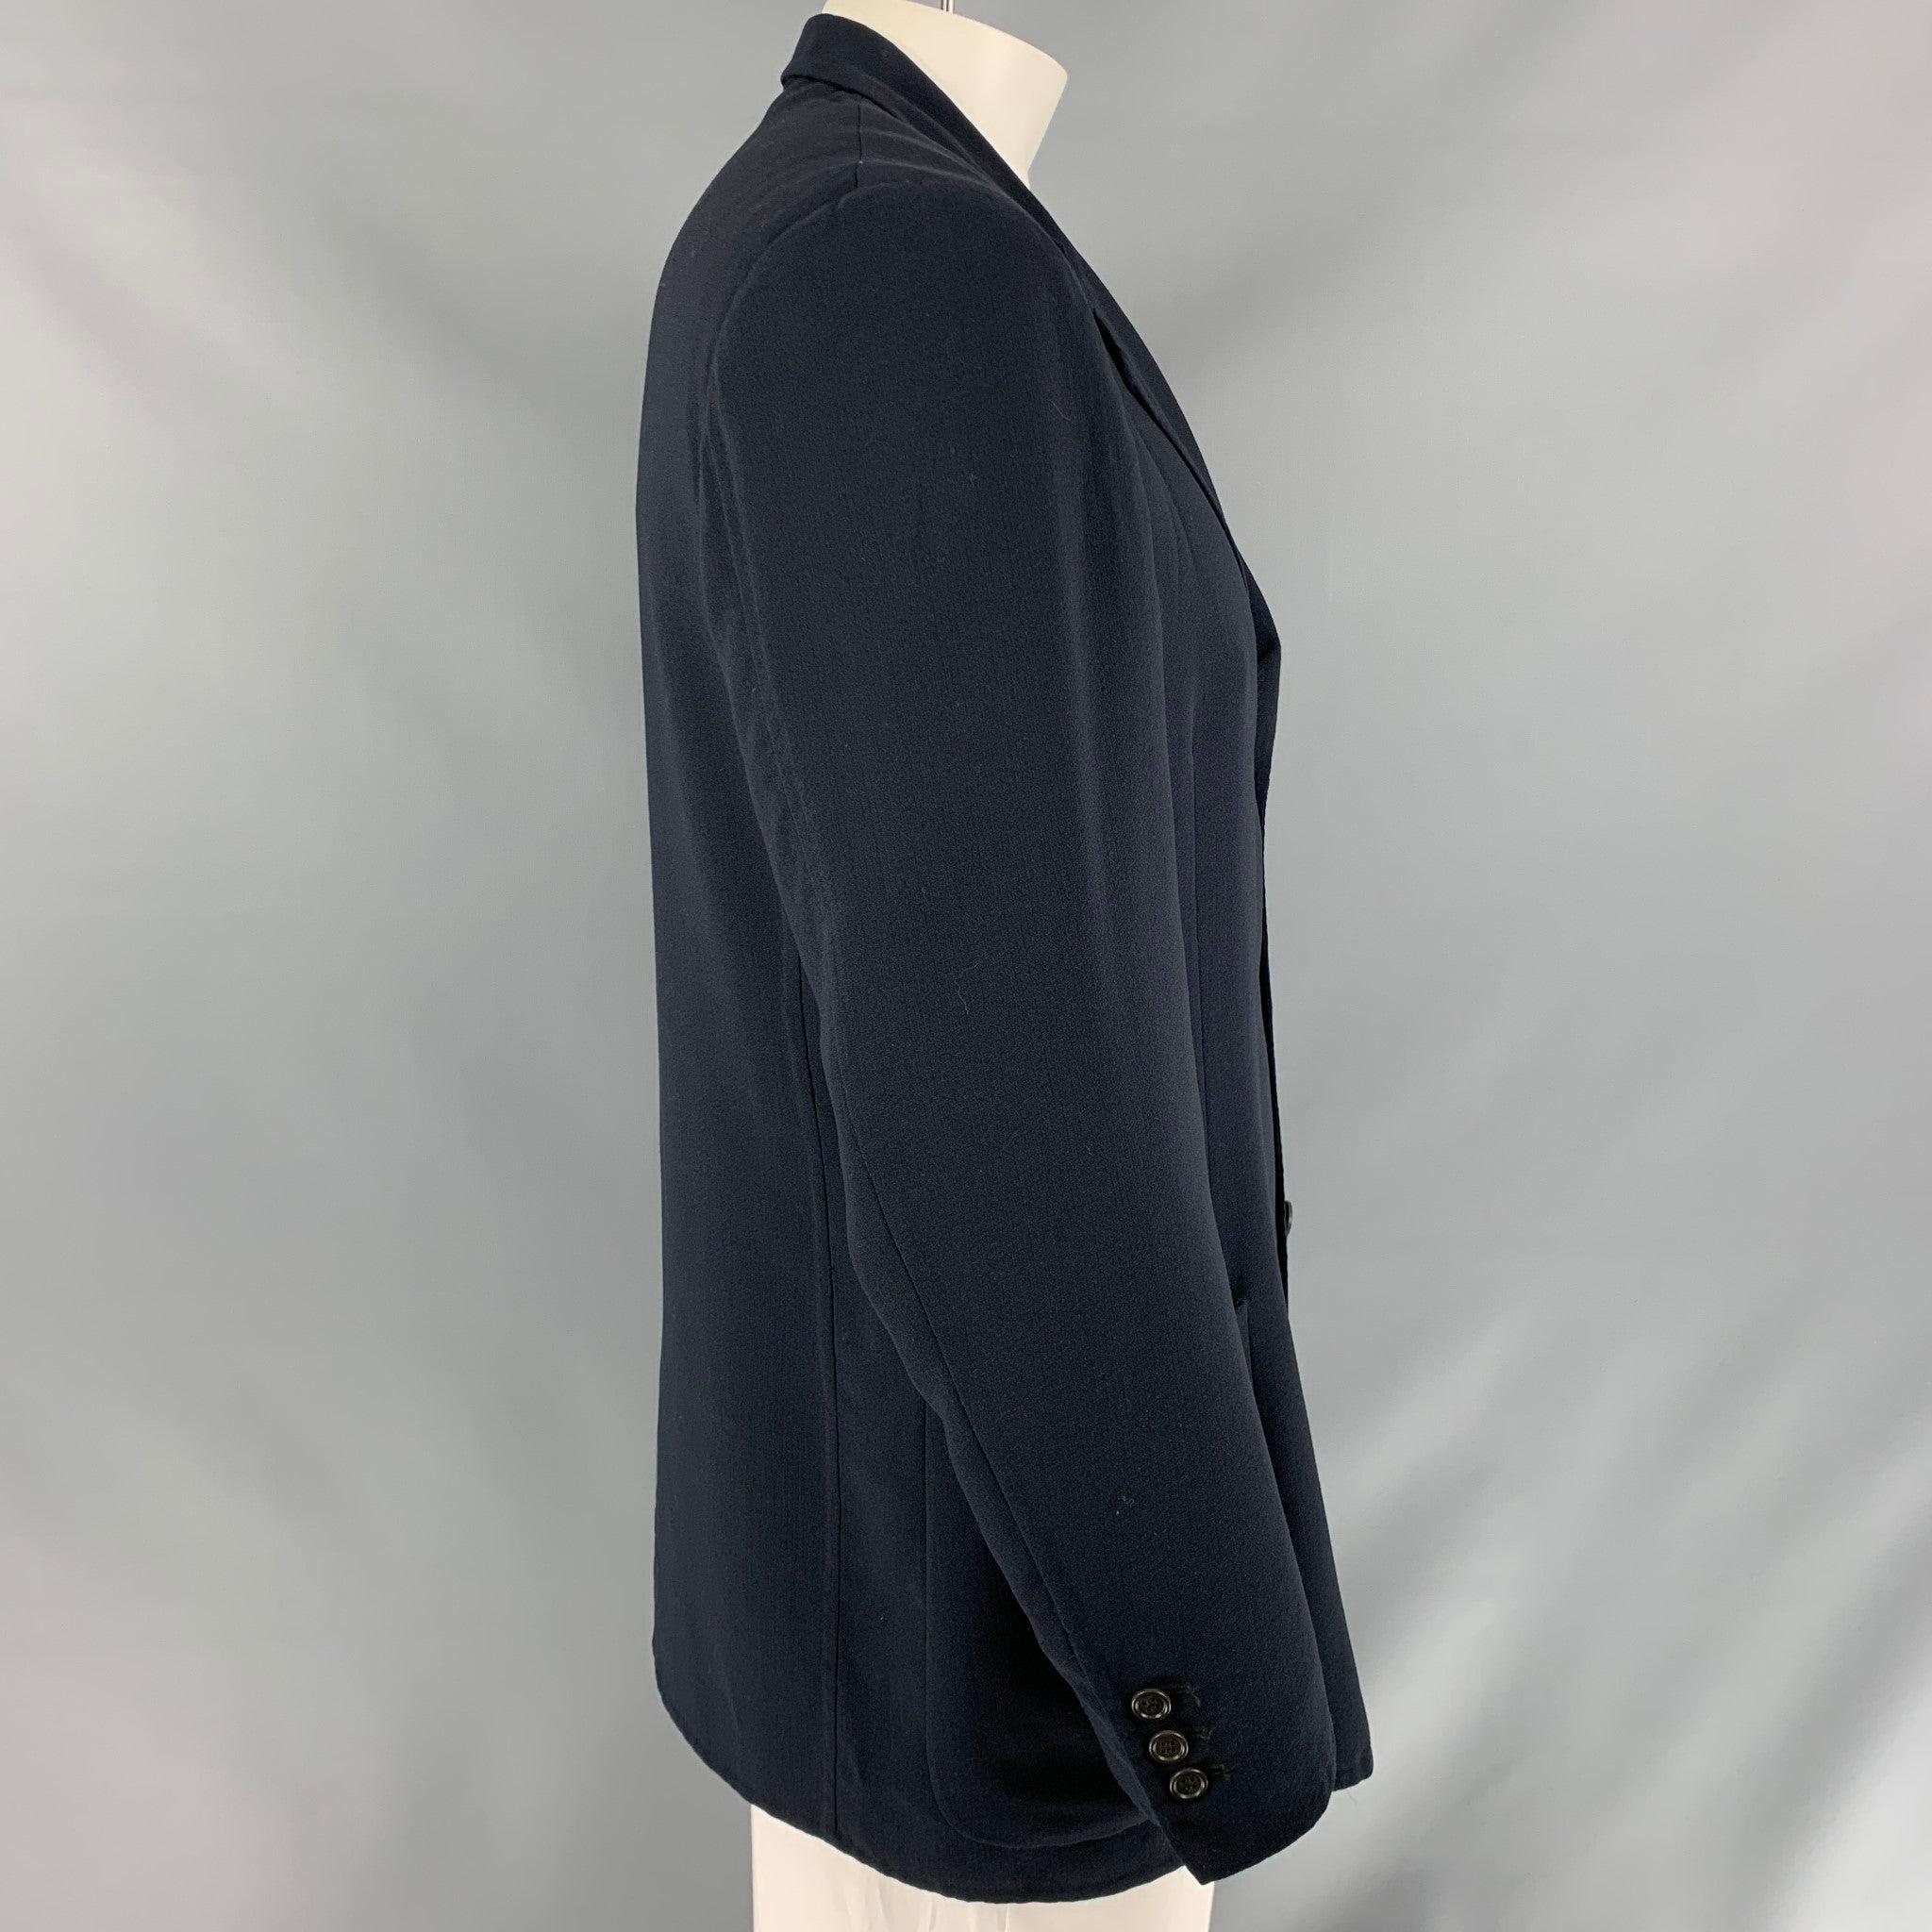 ERMENEGILDO ZEGNA soft sport coat comes in navy solid fabric, unlined featuring a notch lapel, patch pockets, and a three button closure. Excellent Pre-Owned Condition. Fabric Tag Removed. 

Marked:   No size Marked. 

Measurements: 
 
Shoulder: 19